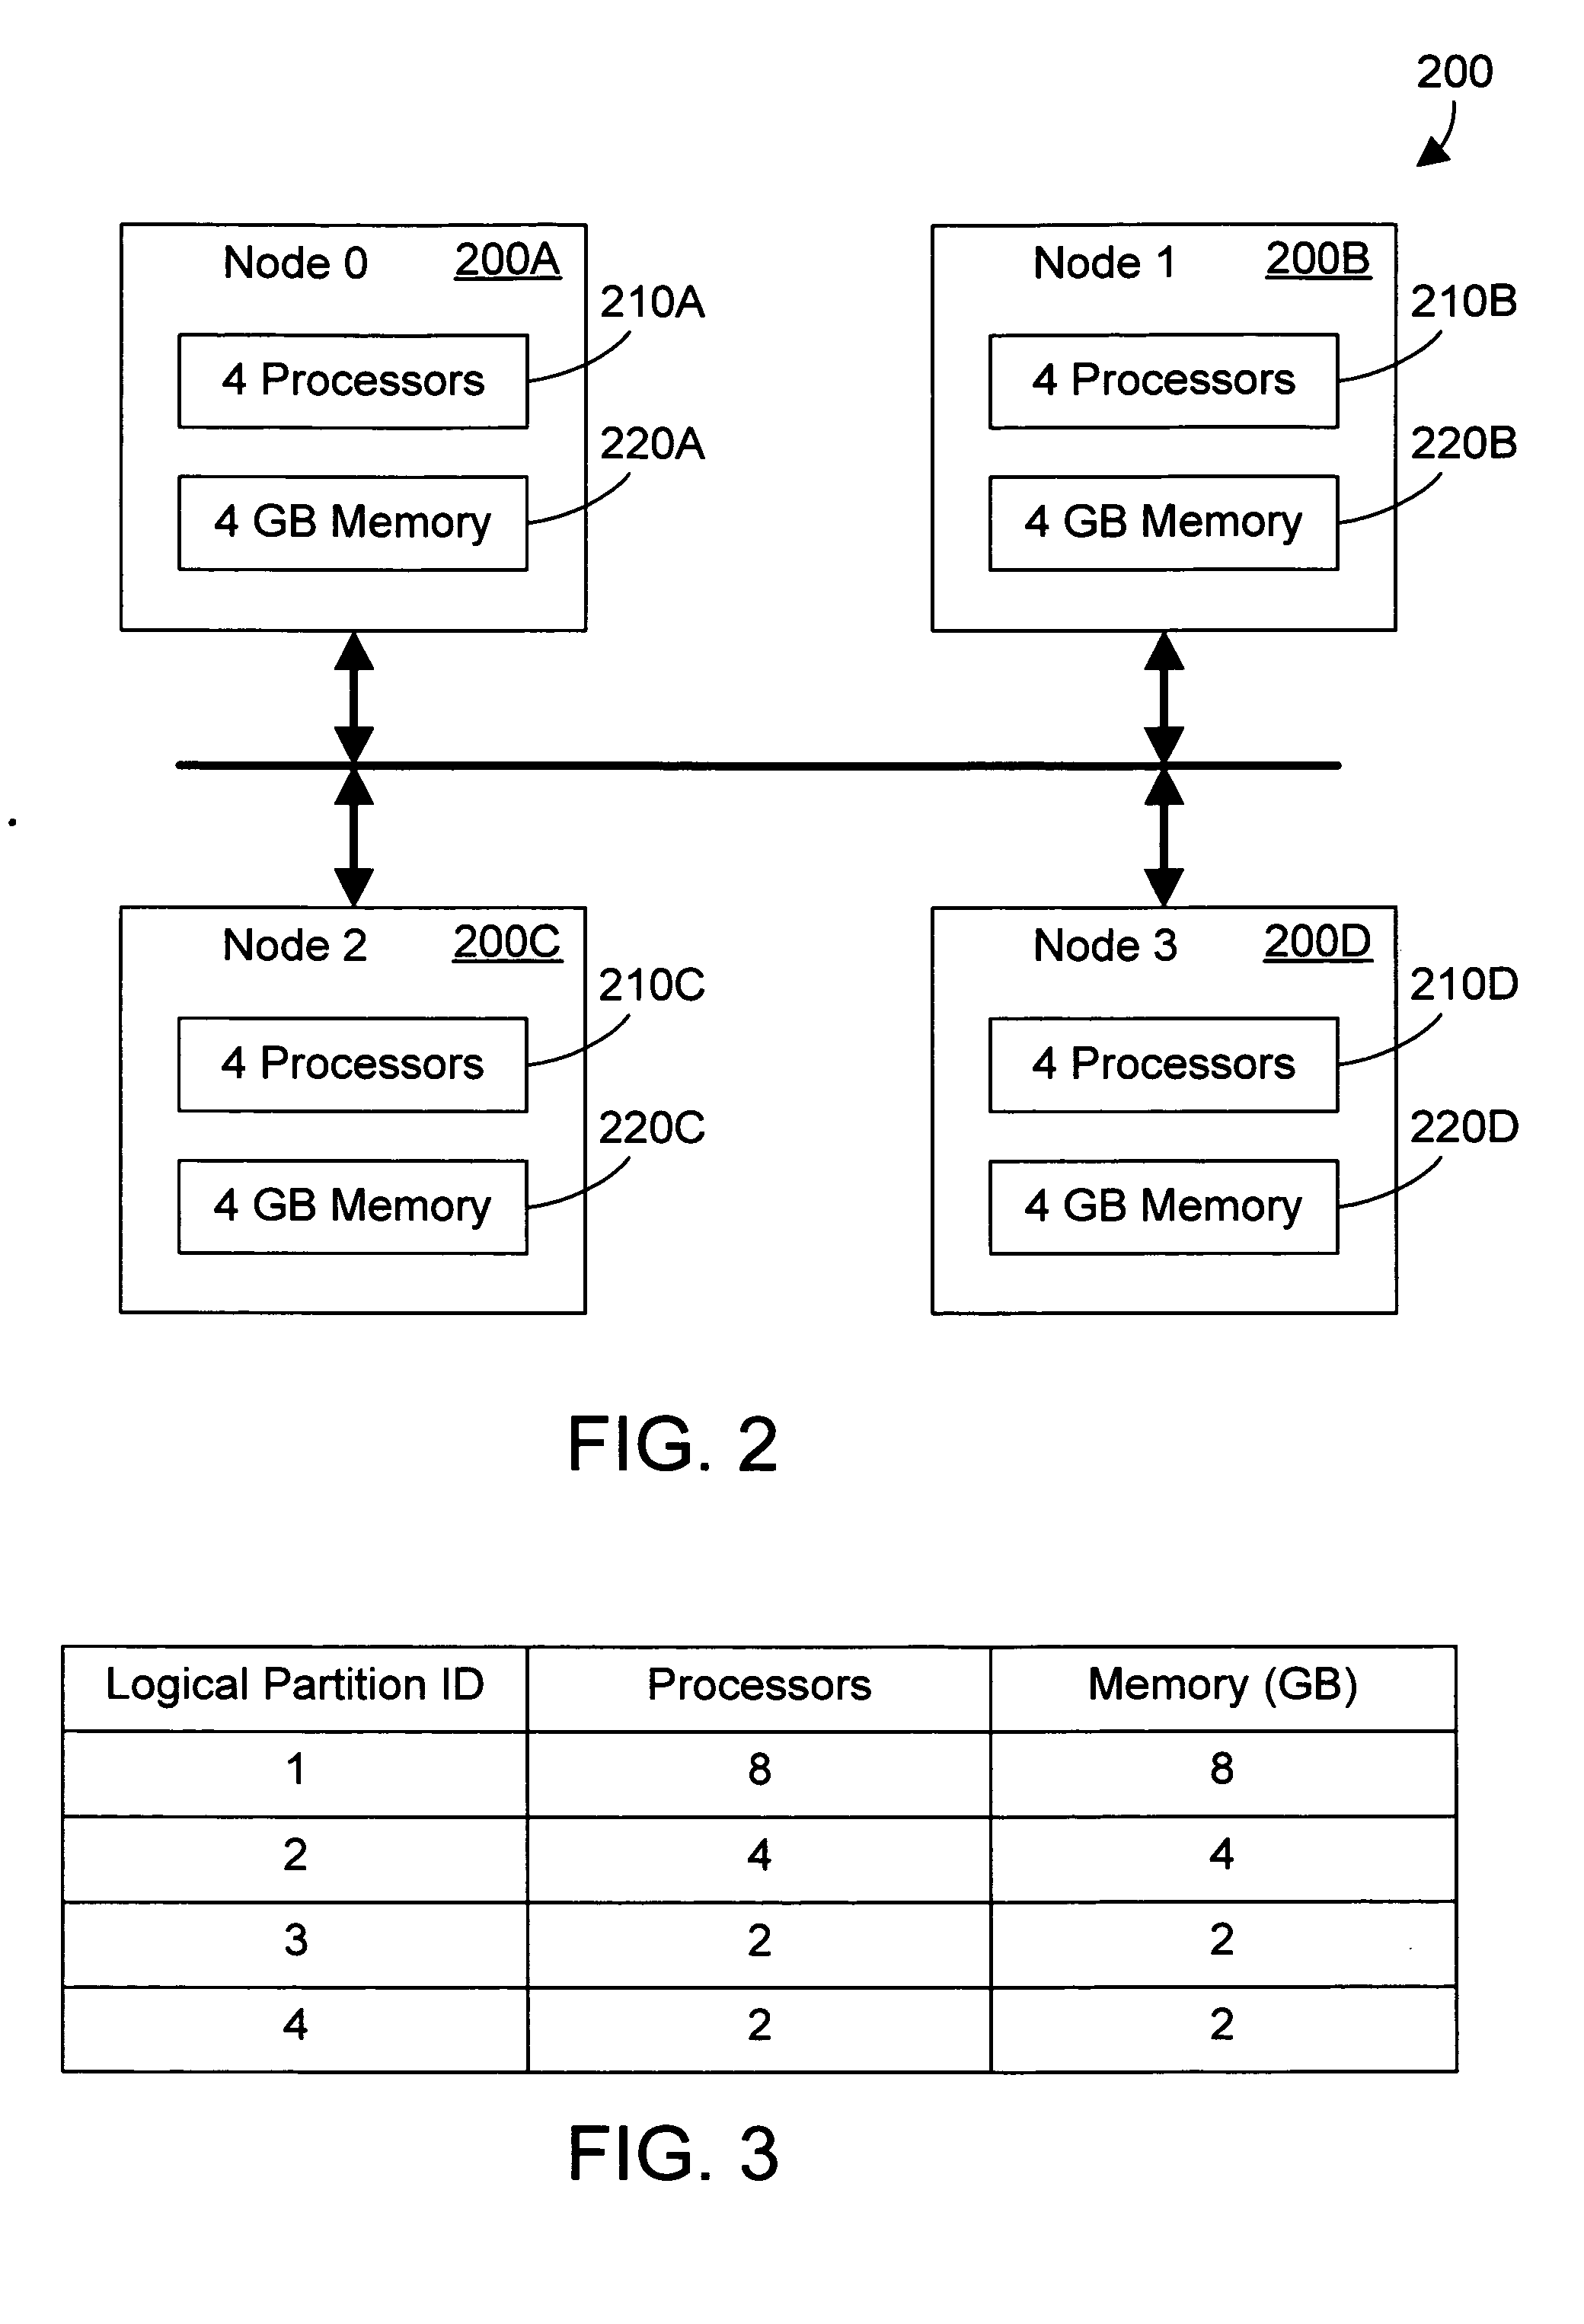 Apparatus and method for dynamically improving memory affinity of logical partitions